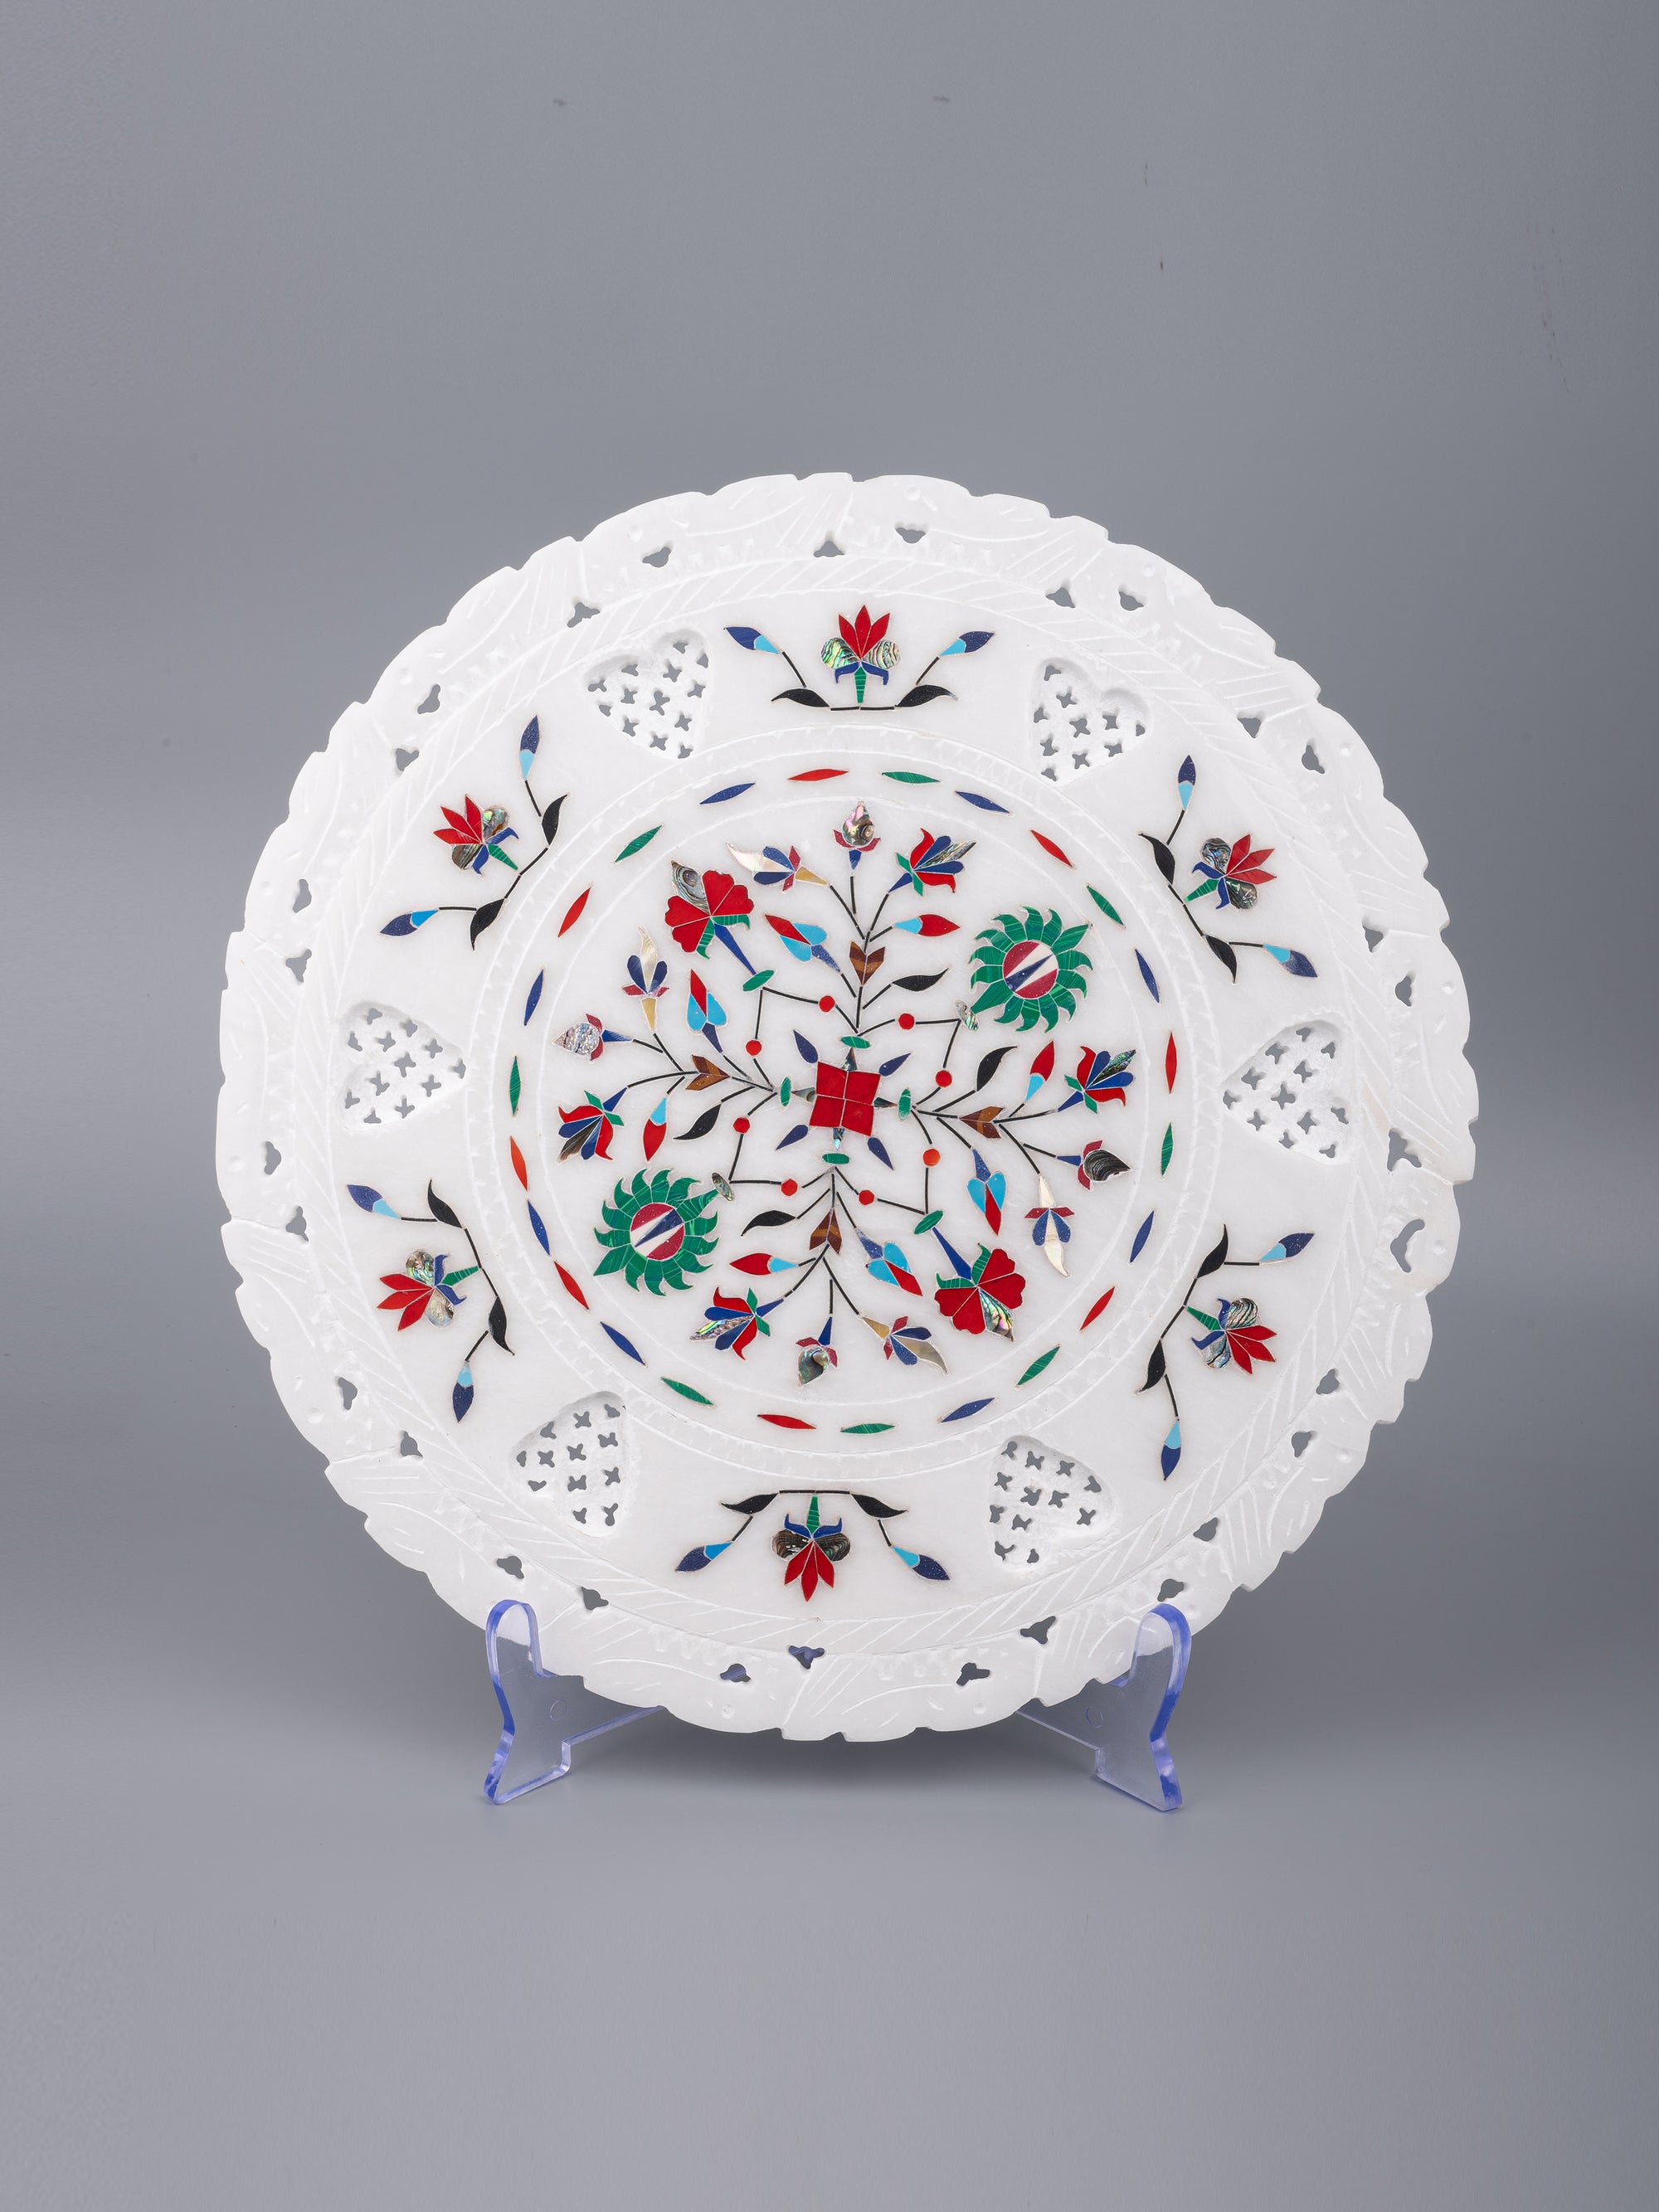 Marble décor plate with intricate red and green floral inlay work - 12 inches - The Heritage Artifacts